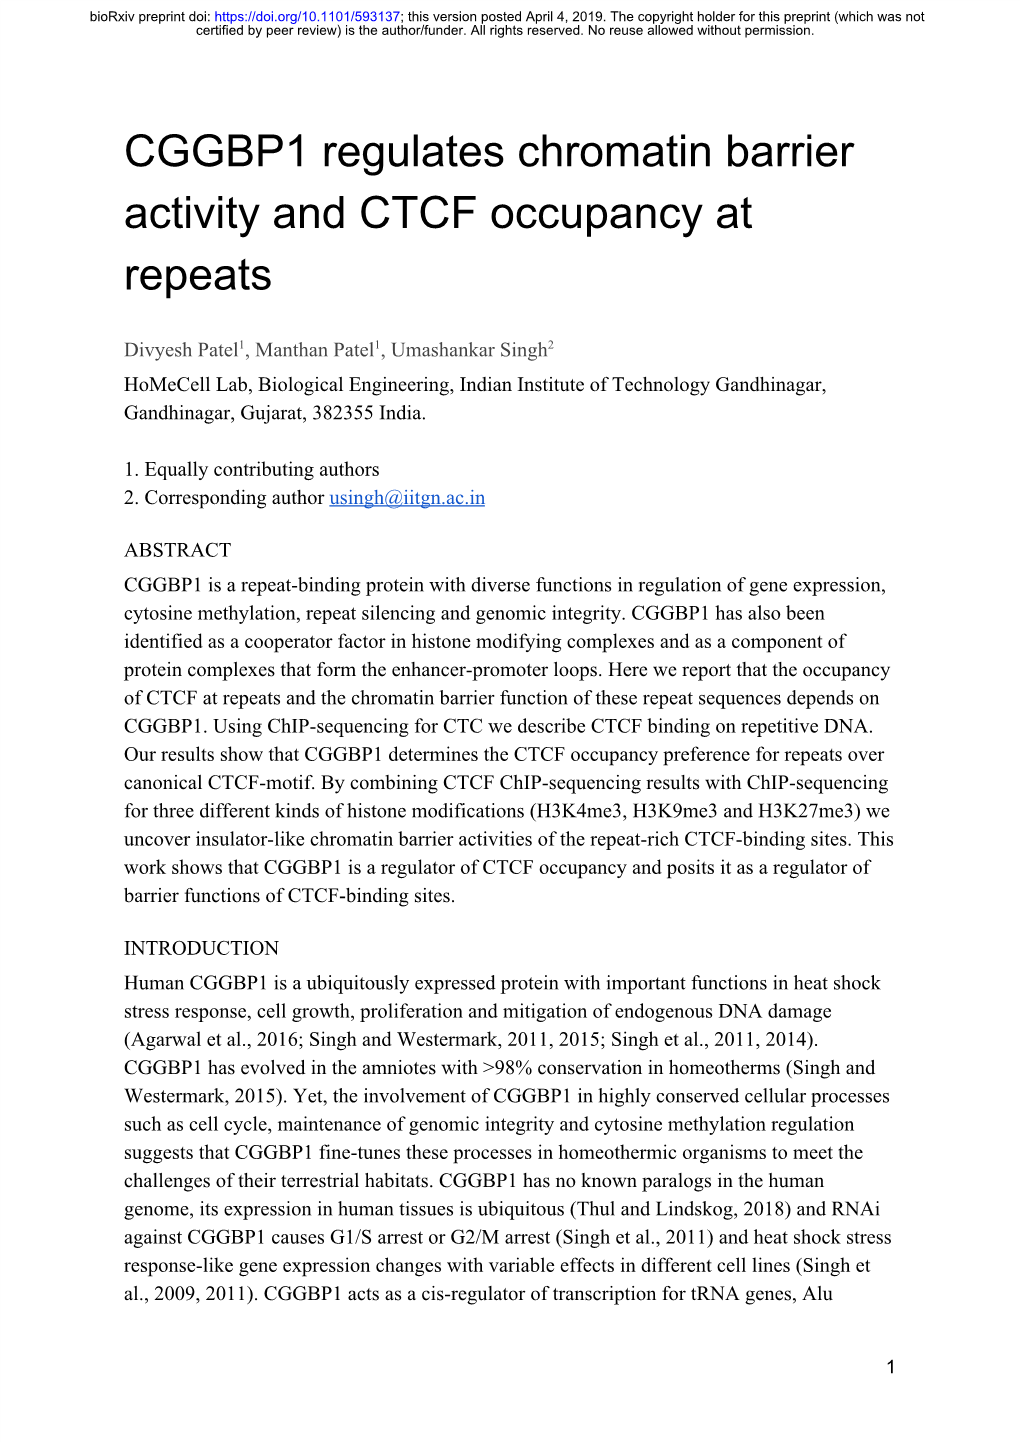 CGGBP1 Regulates Chromatin Barrier Activity and CTCF Occupancy at Repeats